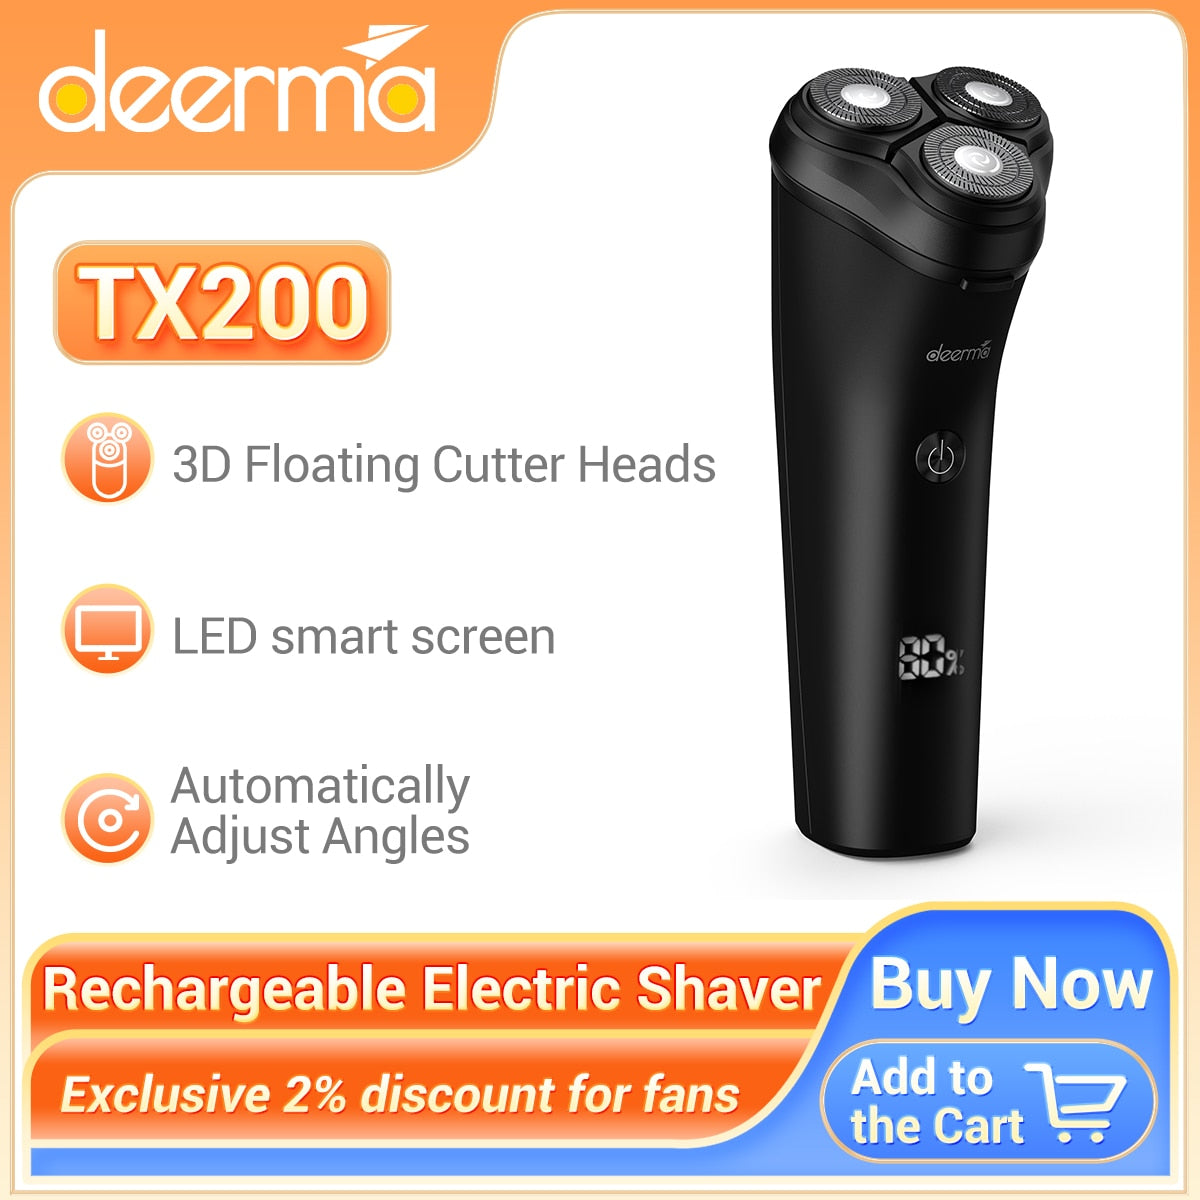 Deerma TX200 Rechargeable IPX7 Waterproof Electric Shaver Men's Rotary Shavers Electric Shaving Razors With LED Smart Screen